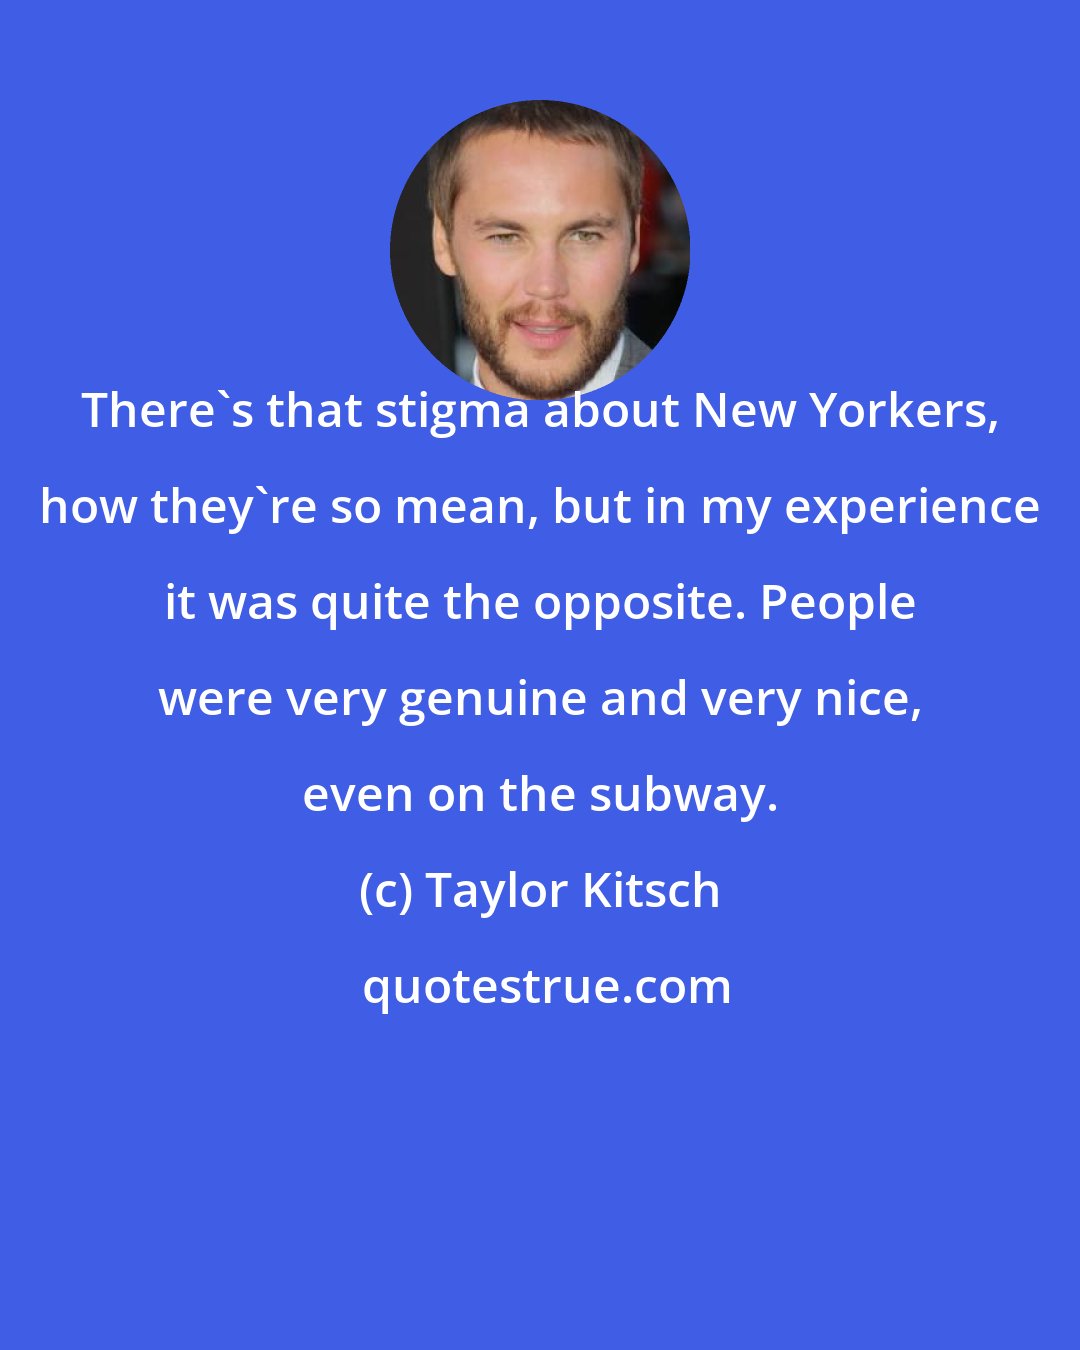 Taylor Kitsch: There's that stigma about New Yorkers, how they're so mean, but in my experience it was quite the opposite. People were very genuine and very nice, even on the subway.